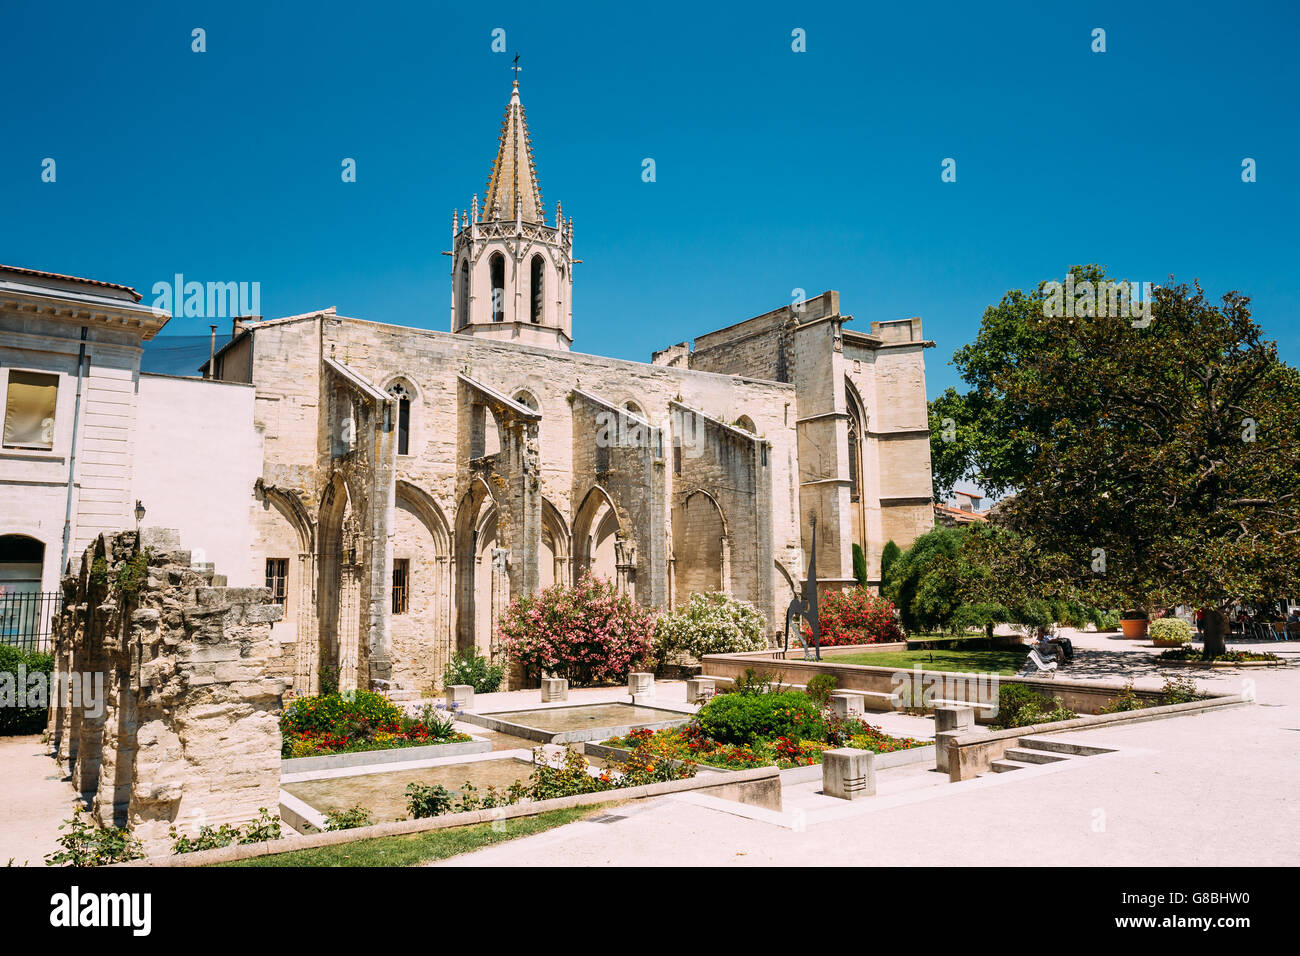 Ancient Old Christian temple St Martial at Square Agricol Perdiguier in Avignon, France Stock Photo